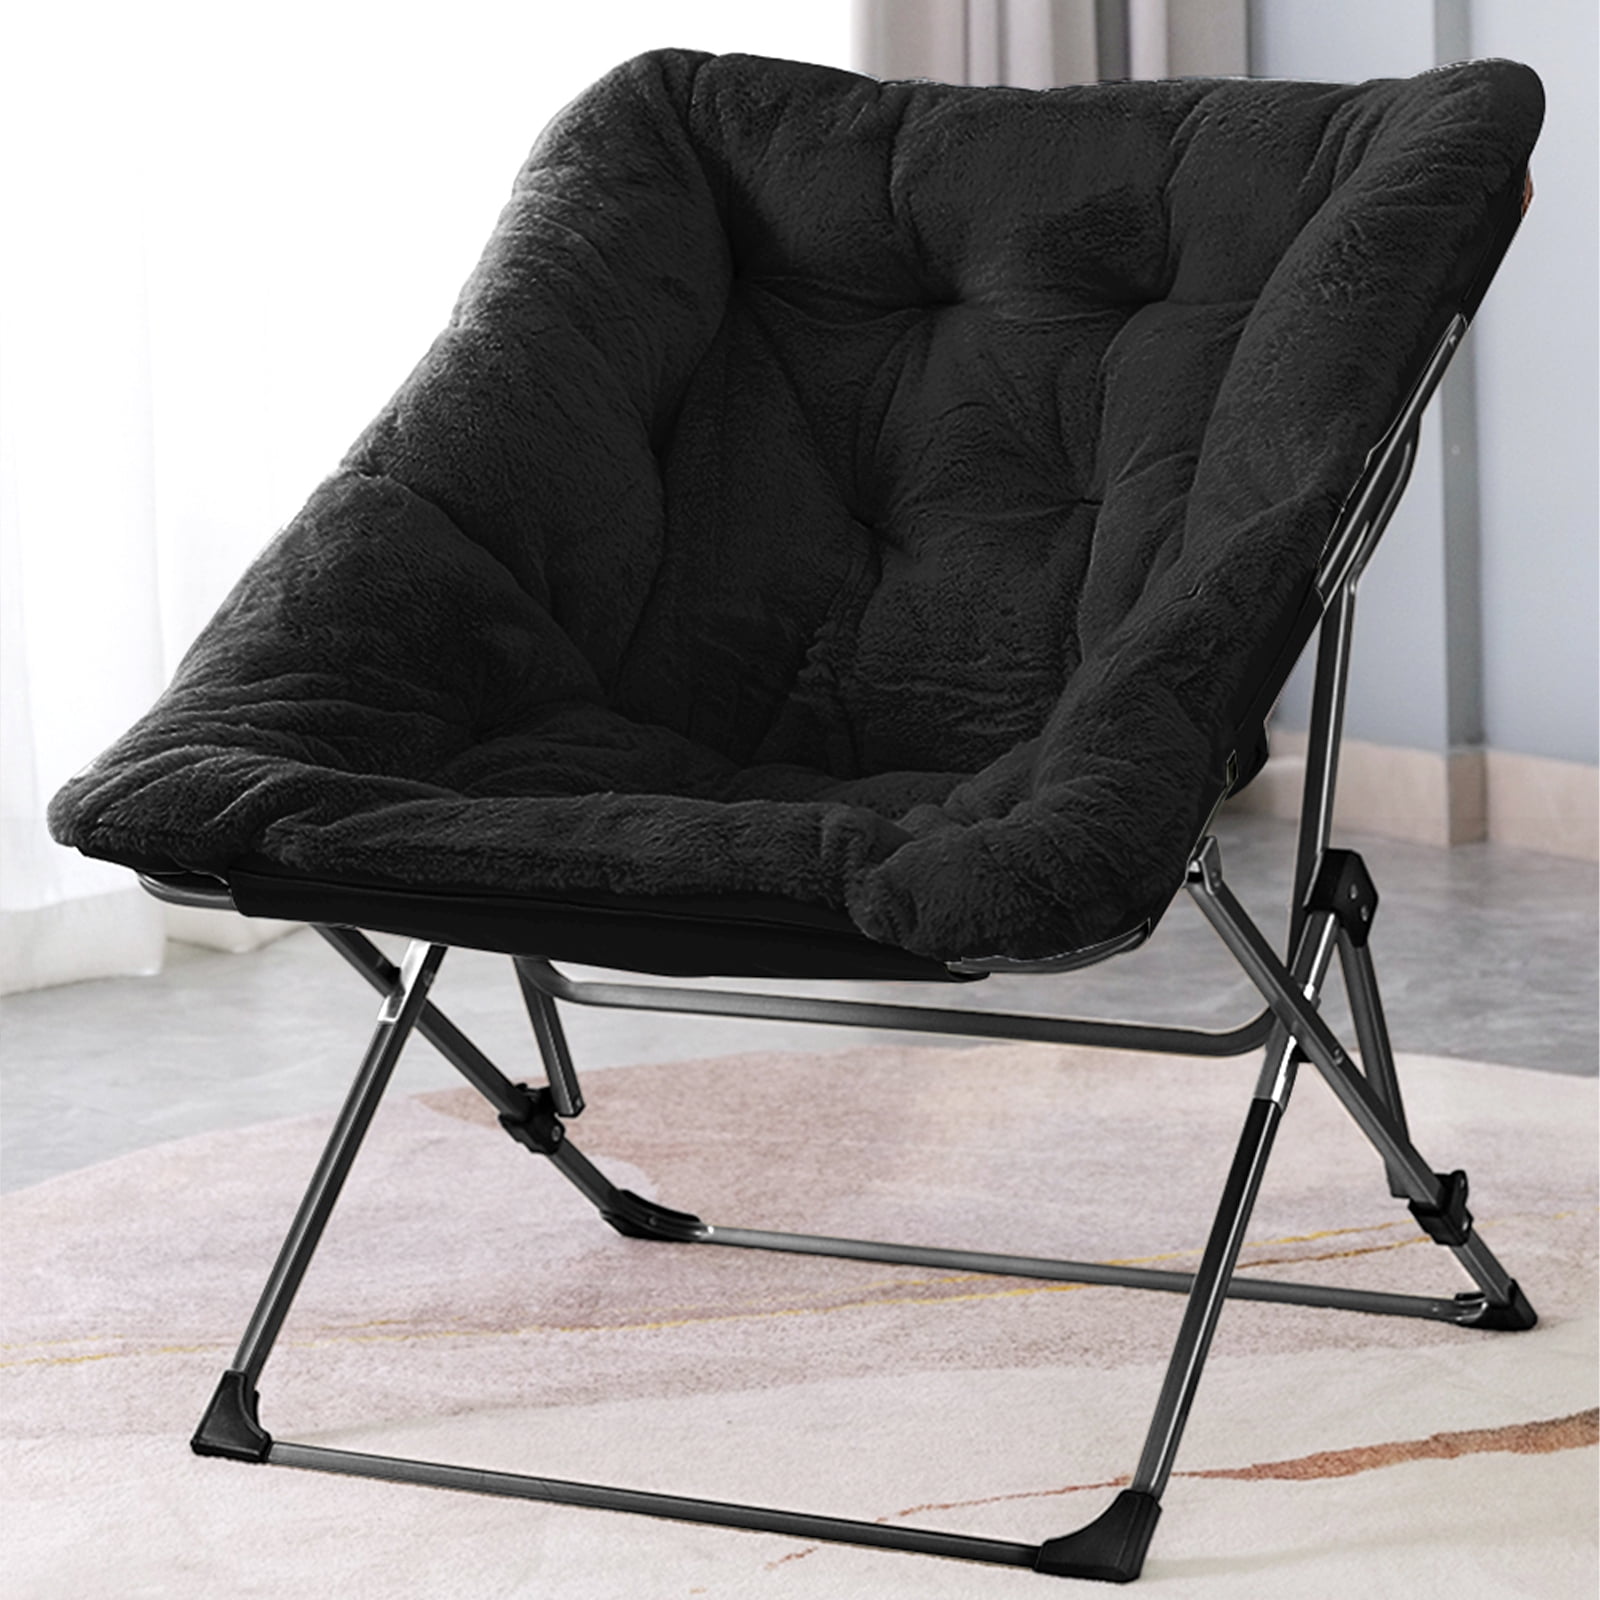 OAKHAM Comfy Saucer Chair, Folding Faux Fur Lounge Chair for Bedroom and Living Room, Flexible Seating for Kids Teens Adults, X-Large, Black - image 1 of 7